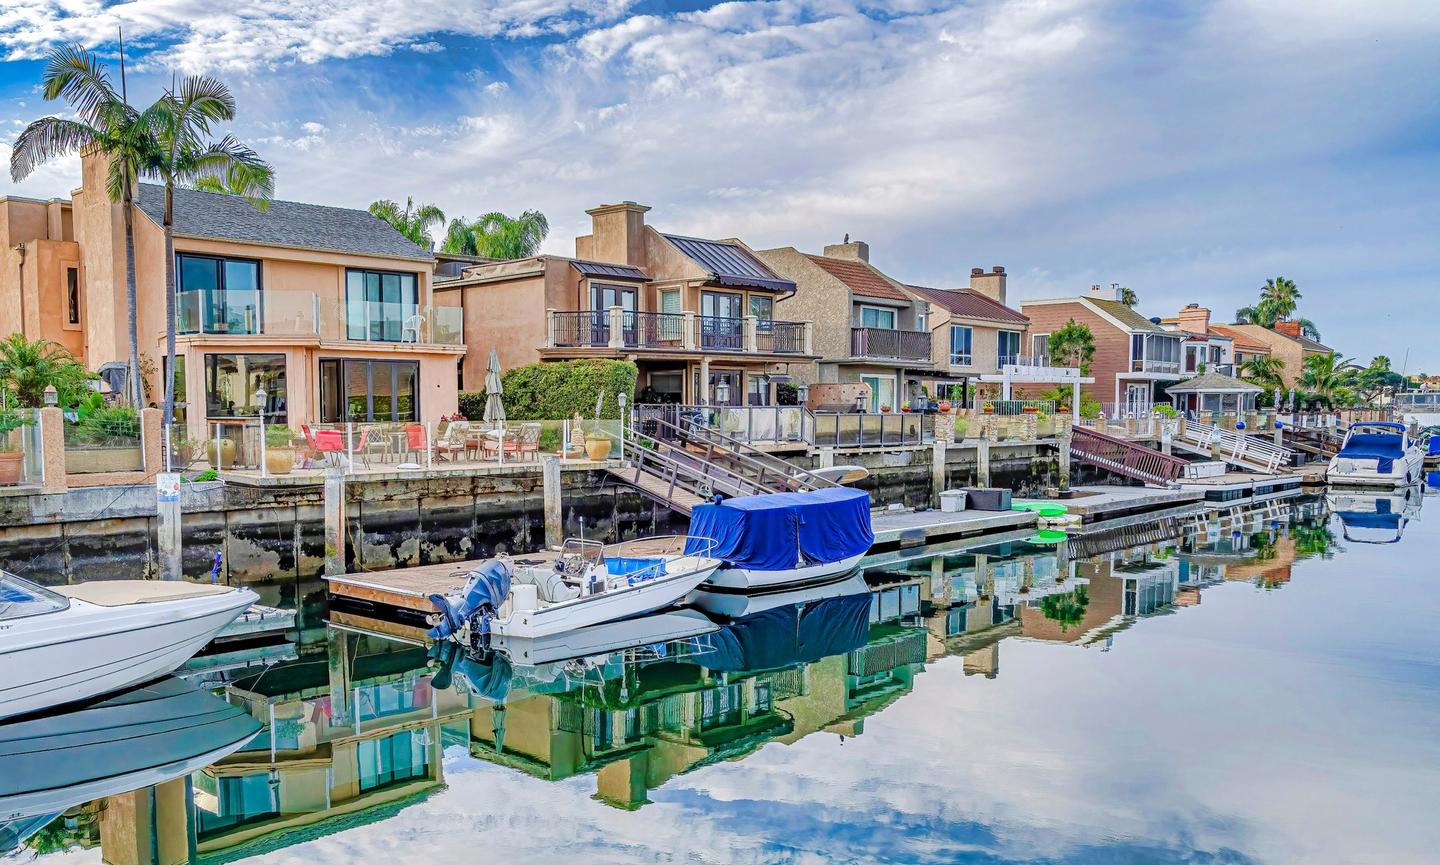 Huntington Beach is home to some of the most coveted real estate in the country, including waterfront properties with private boat docks.